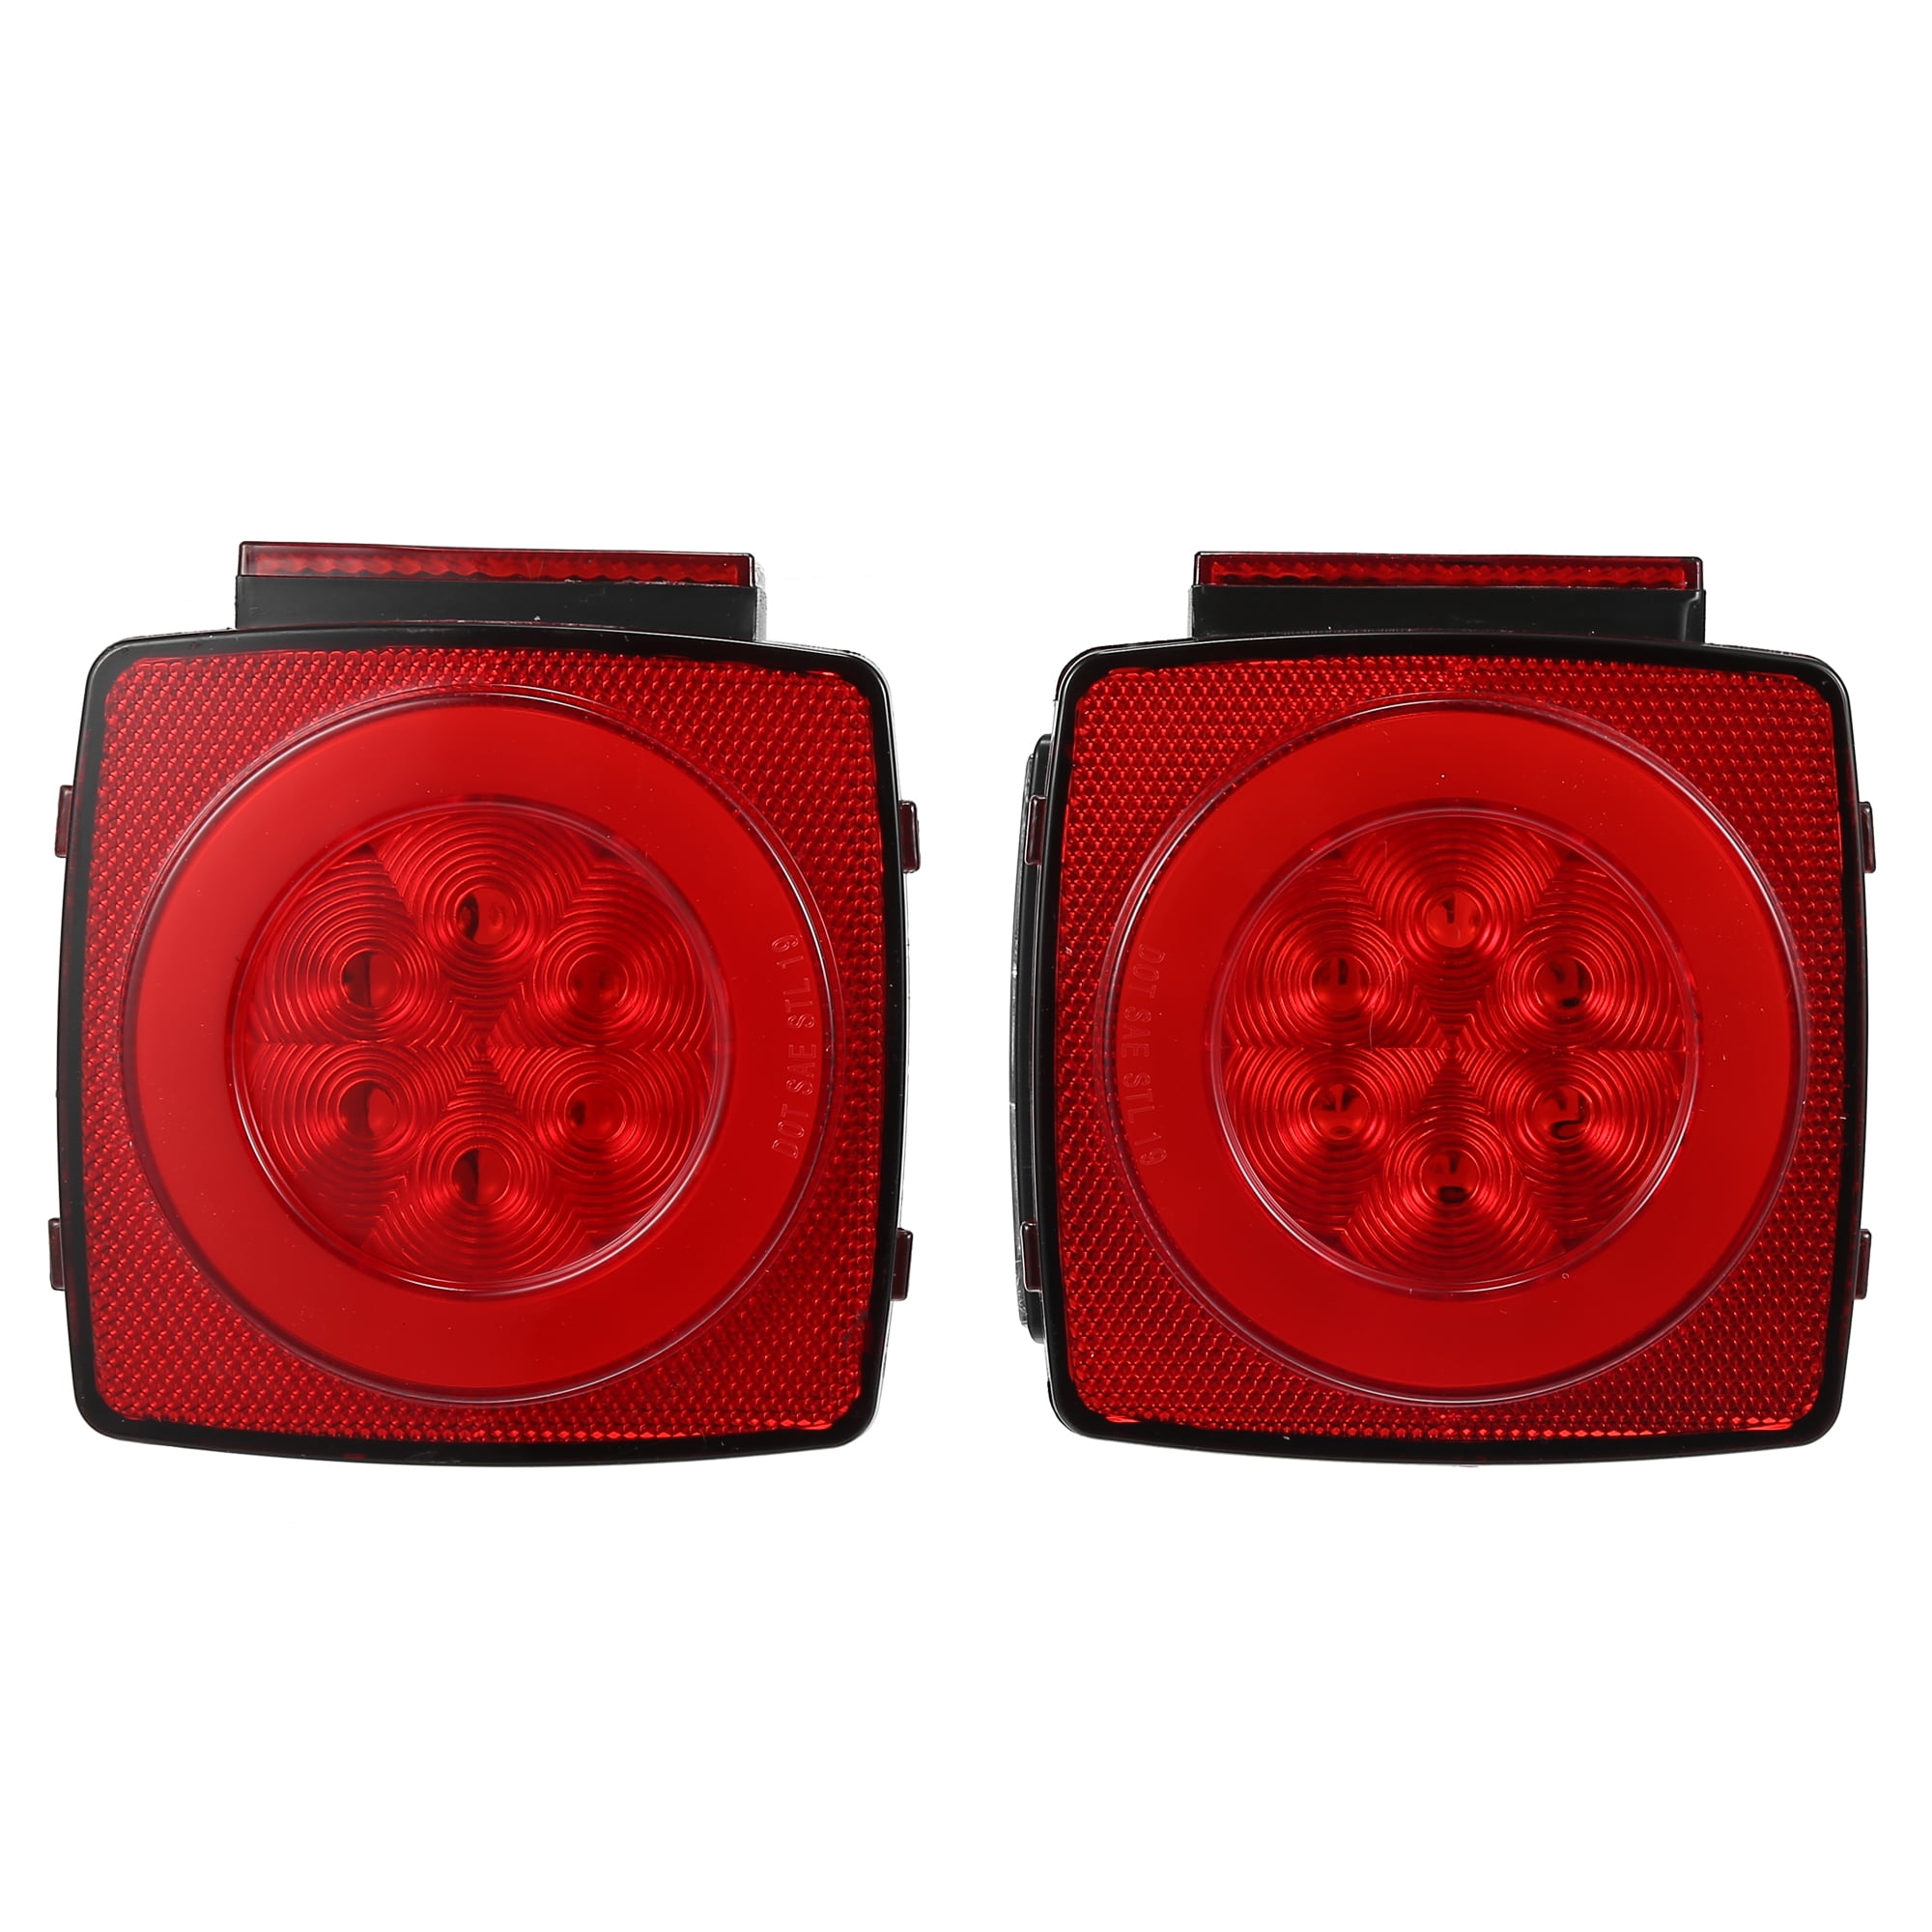 Tractor Rear Tail lamp Stop Flasher Light Flat Base Set of 2 Rh+LH 